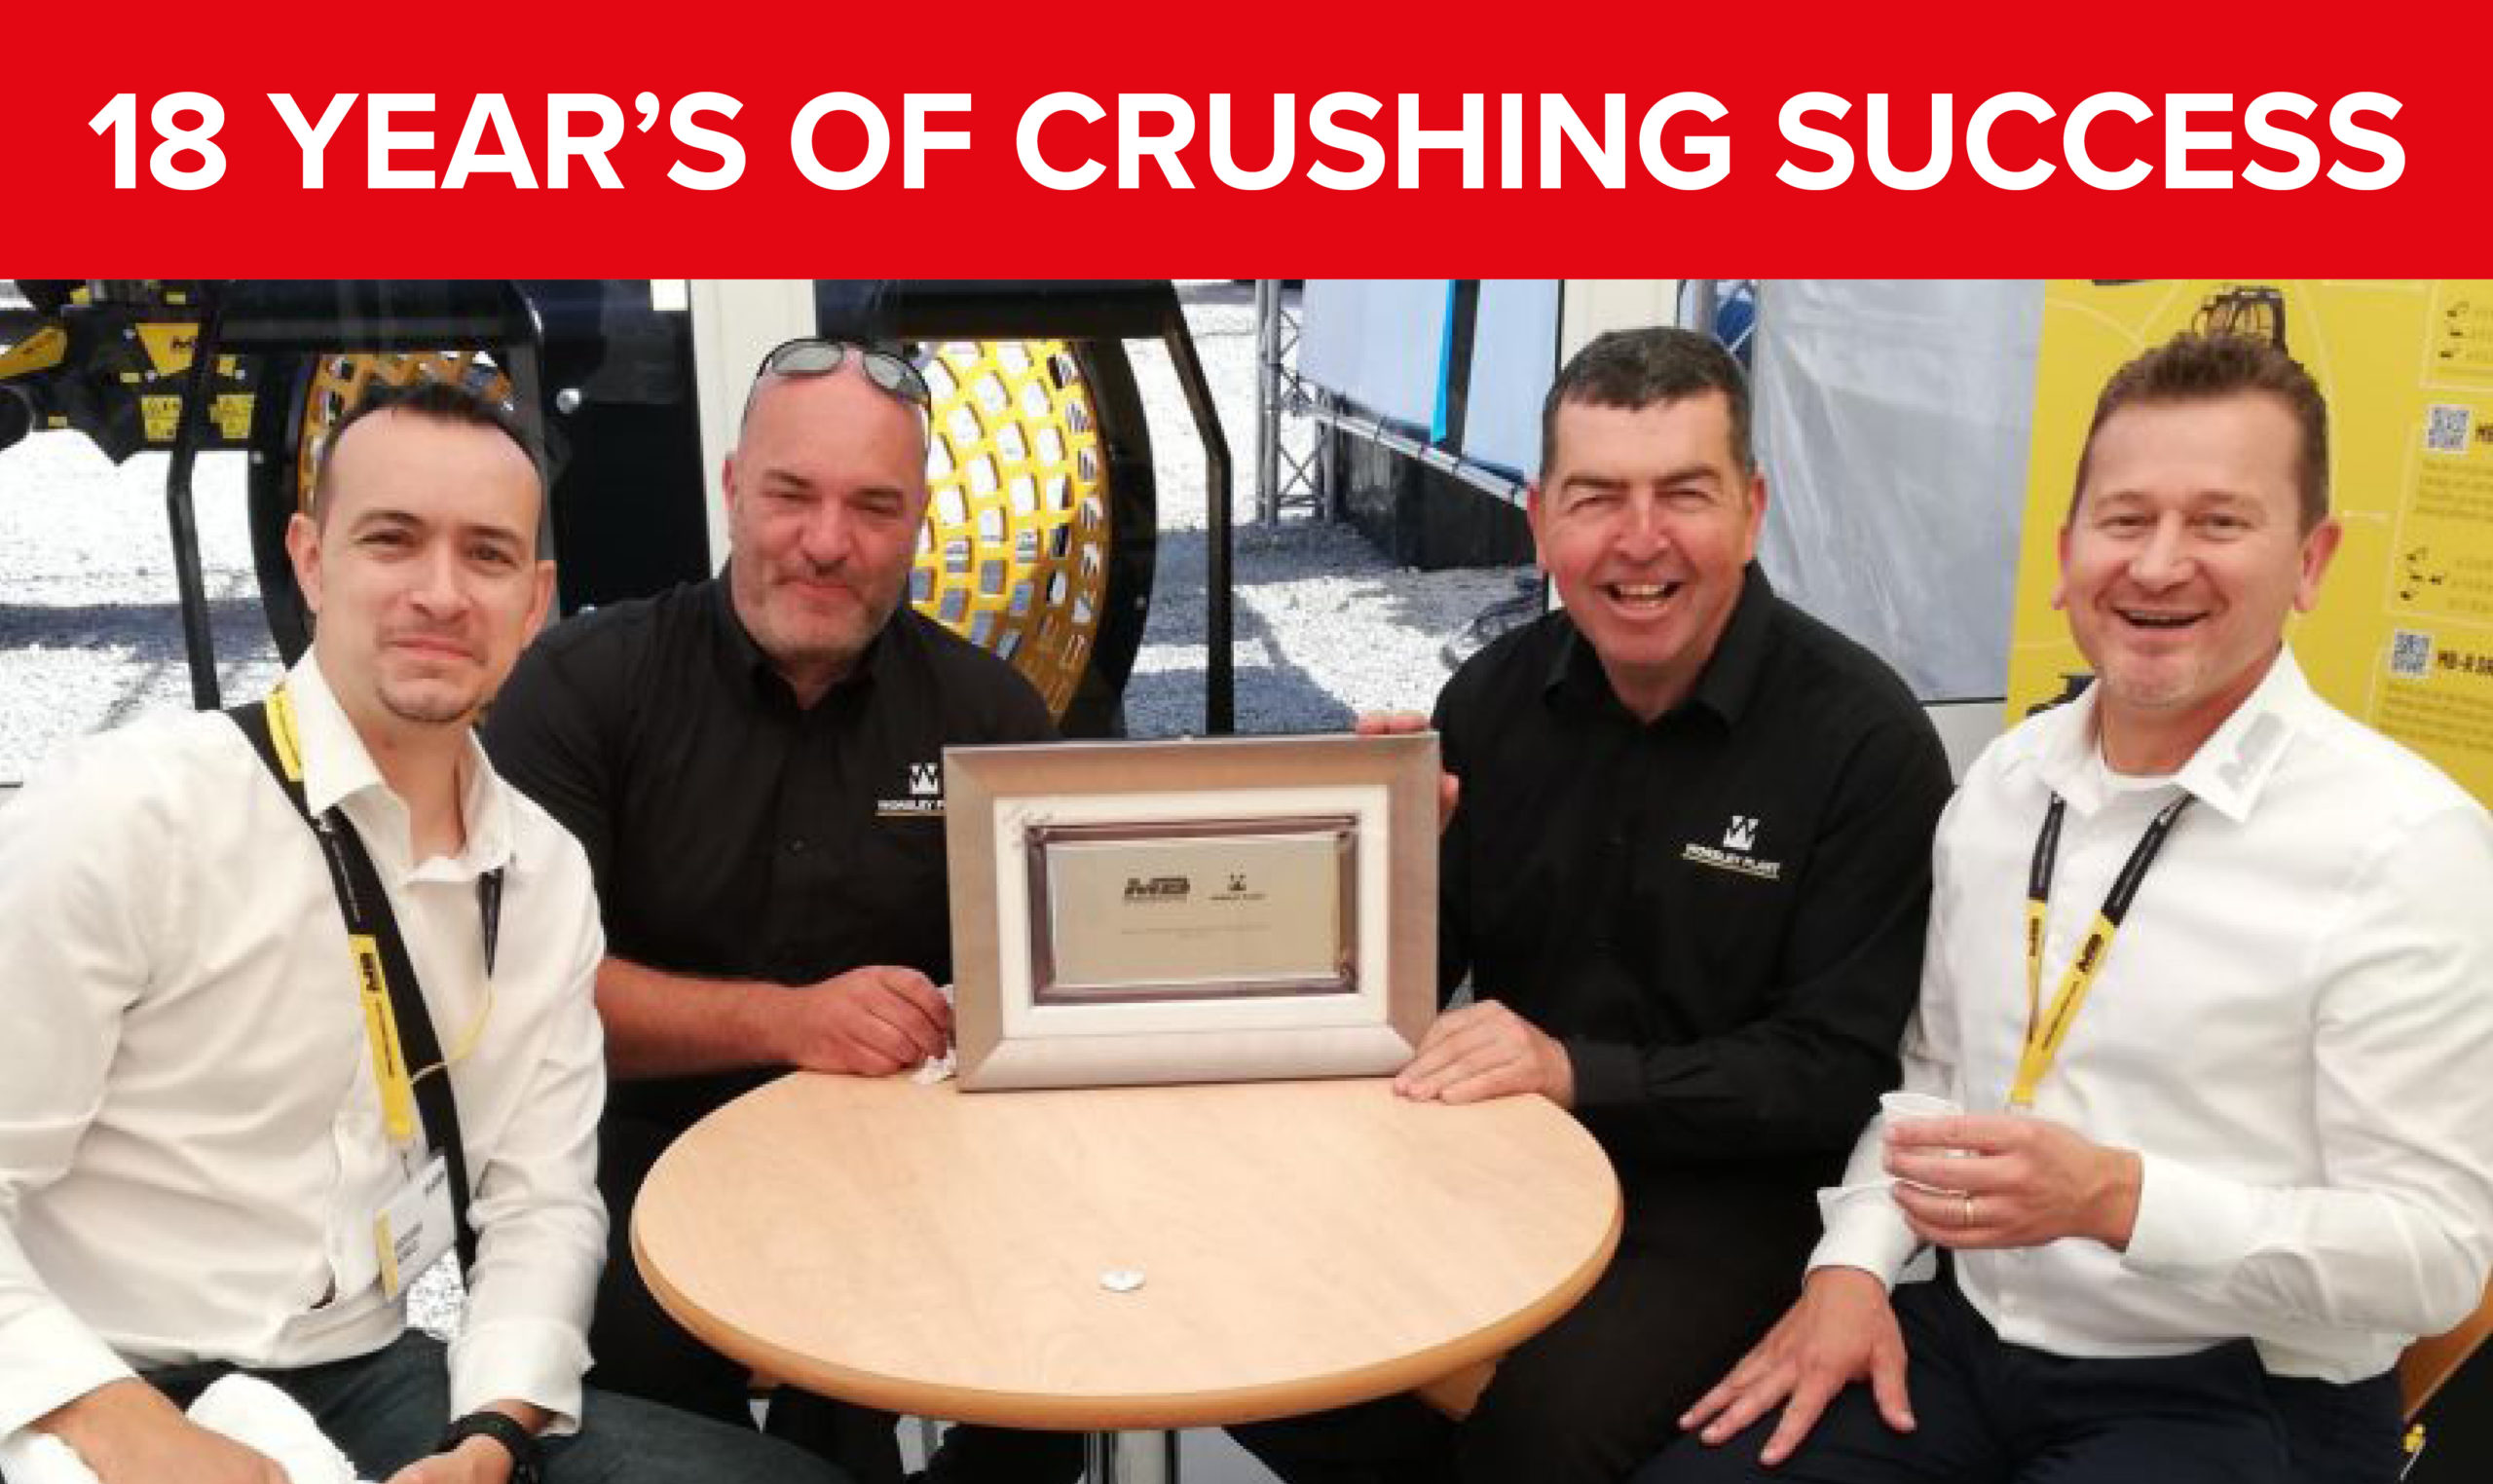 Worsley Plant Celebrate 18 Years of Crushing Success with MB